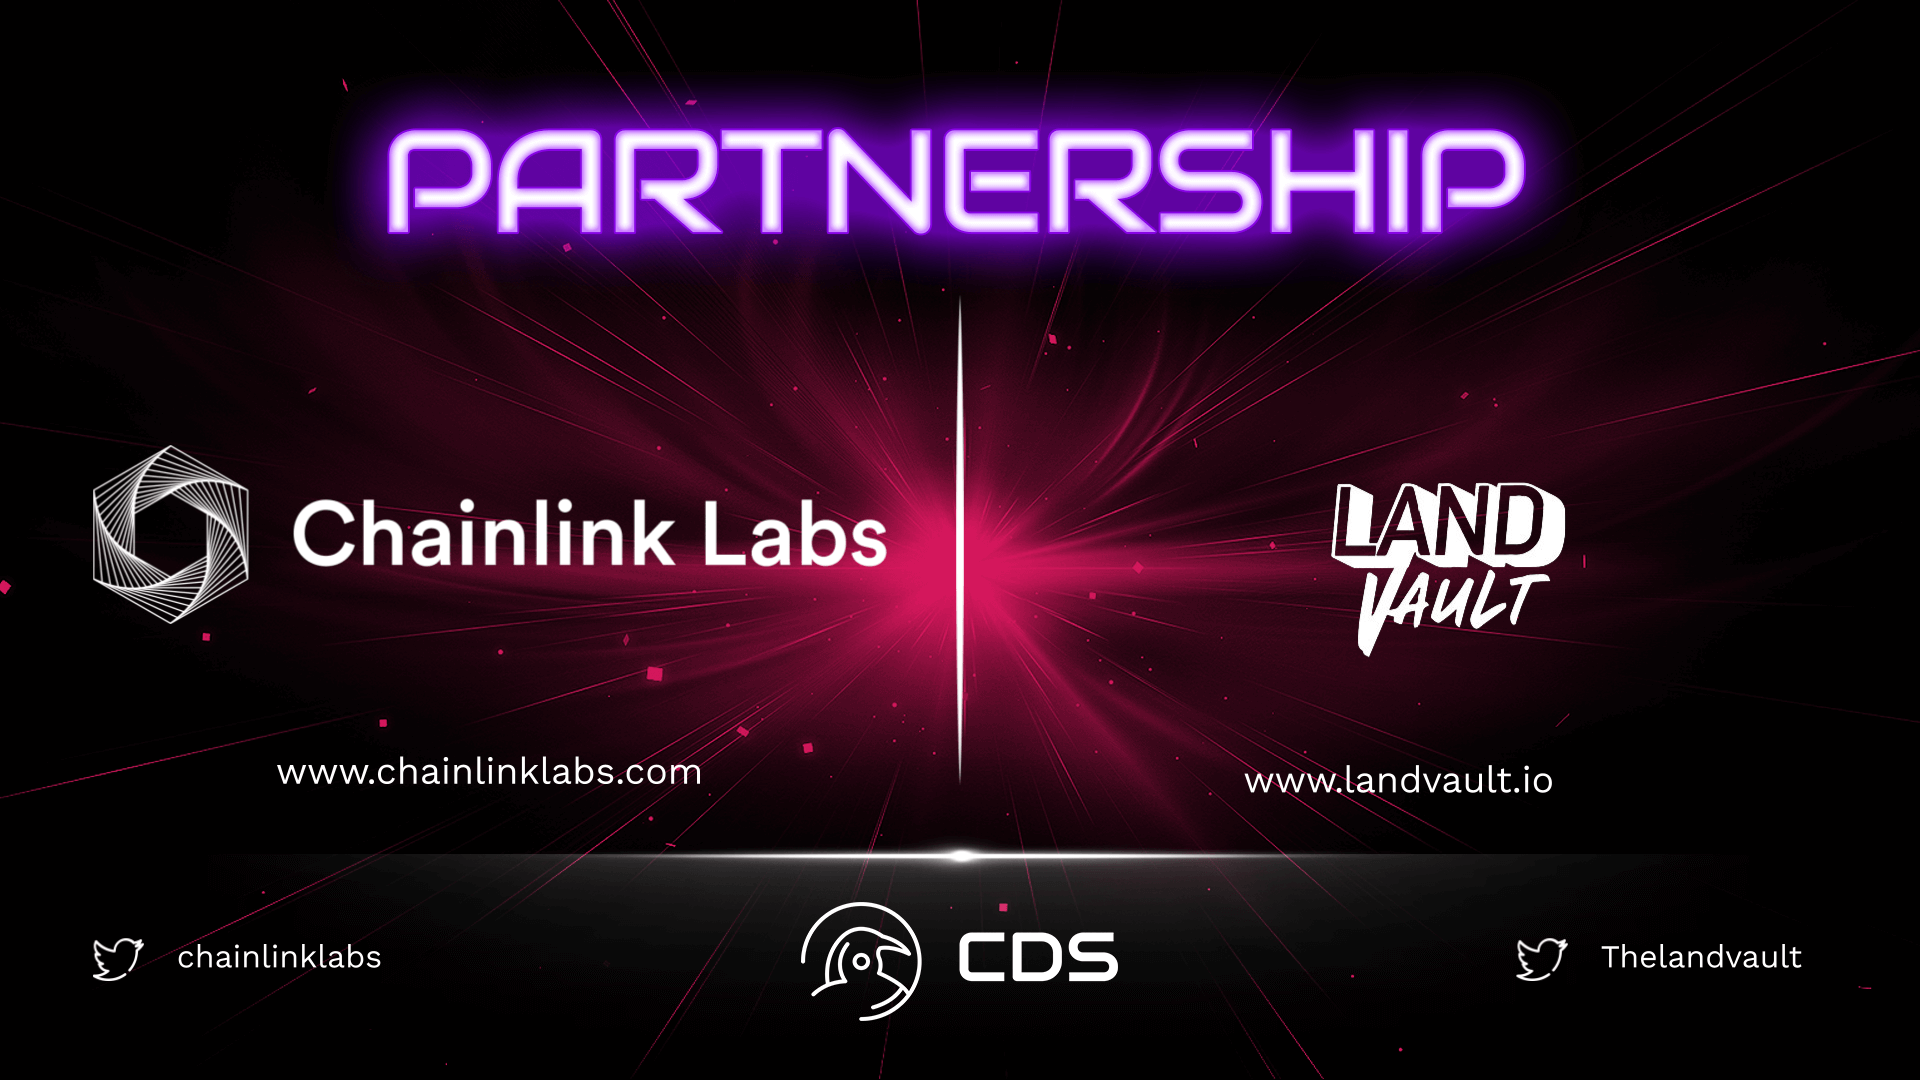 Chainlink Labs Partnership with LandVault